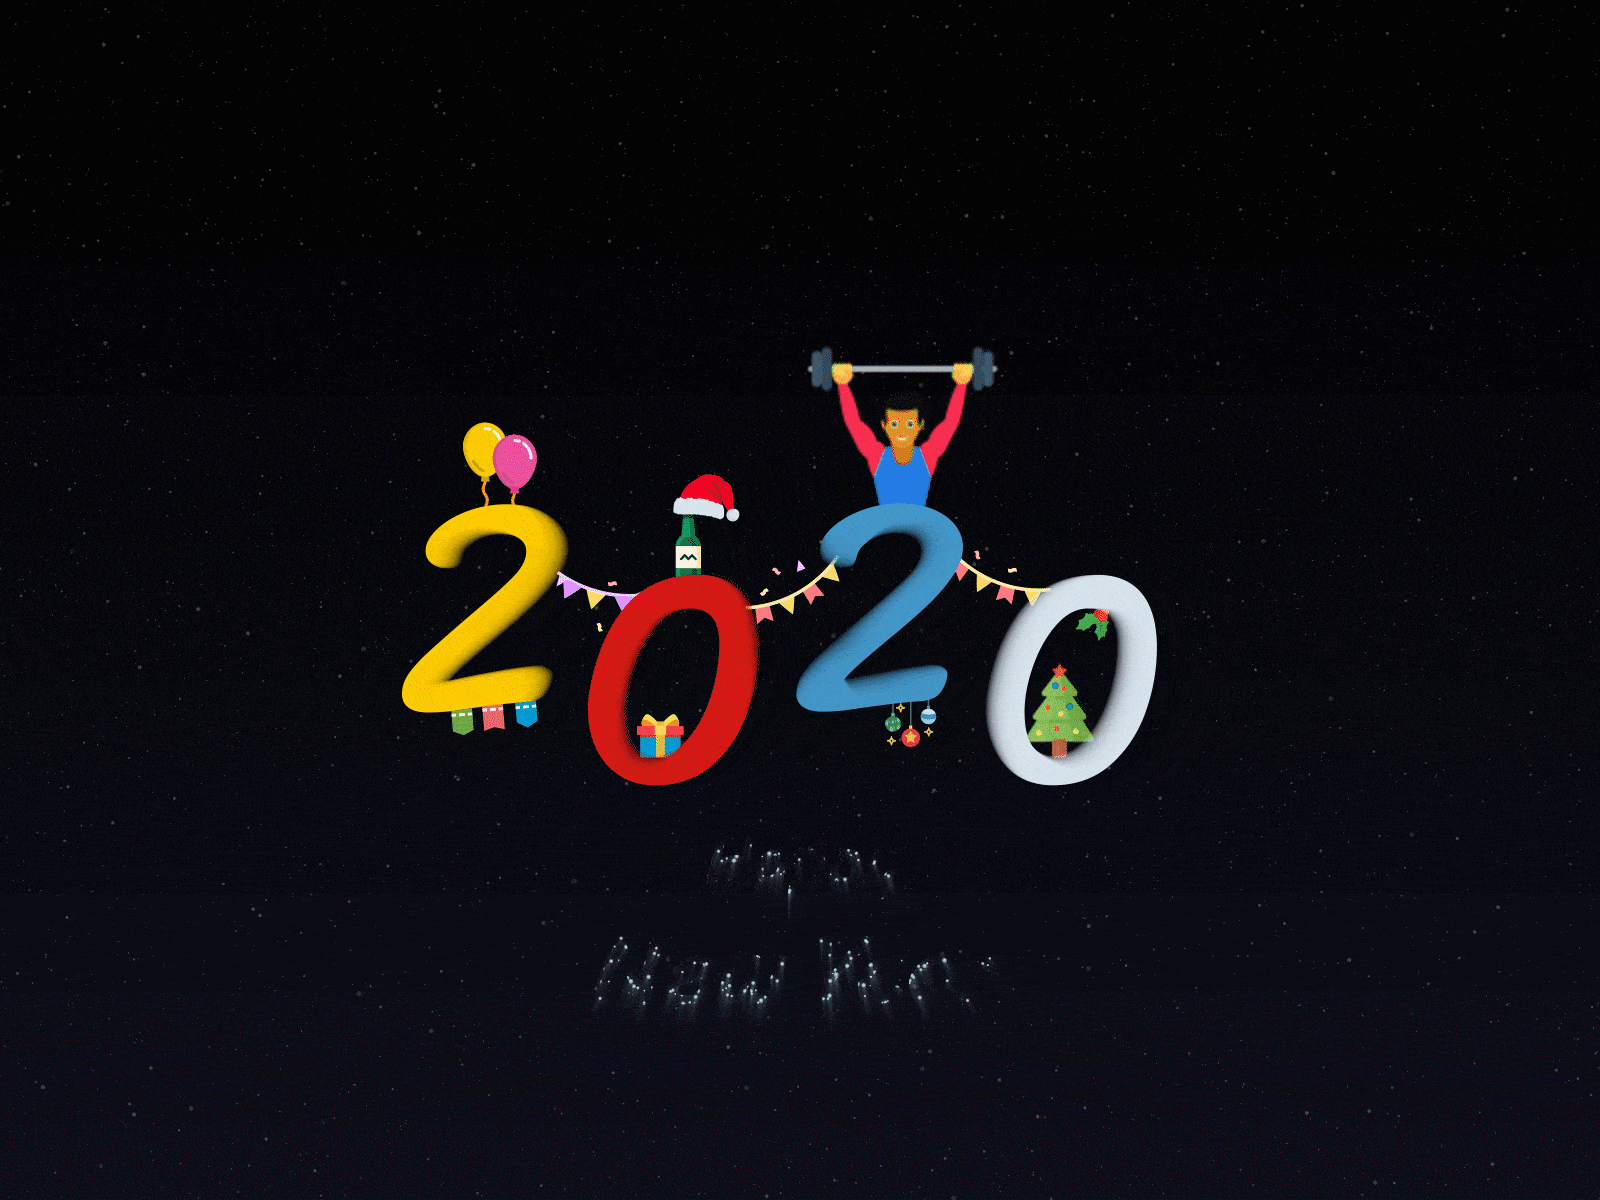 Happy New Year 2020 2020 after affects animation balloons celebrations christmas colorful fireworks fitness galaxy gif happy new year illustration new year stars